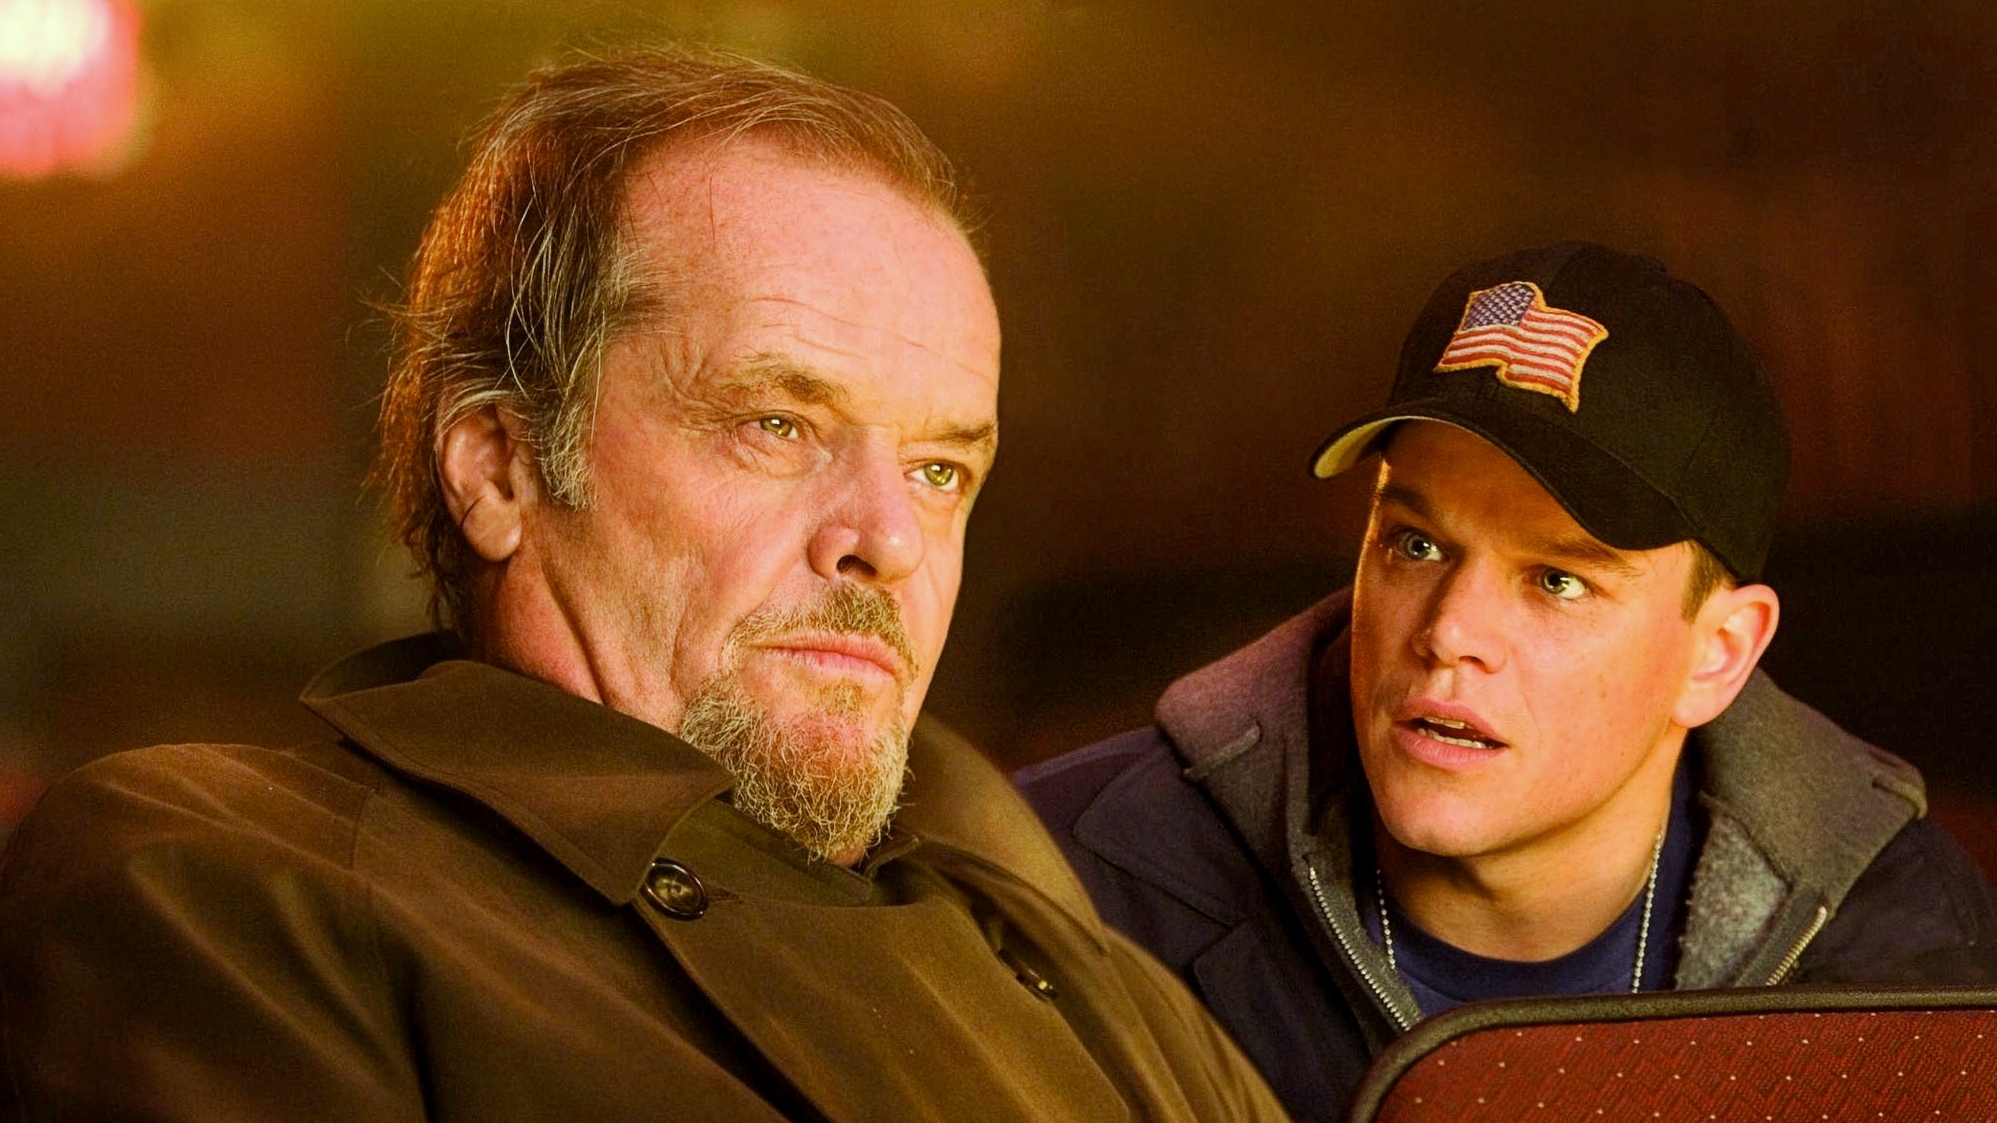 A still from The Departed featuring Matt Damon and Jack Nicholson in a movie theatre.